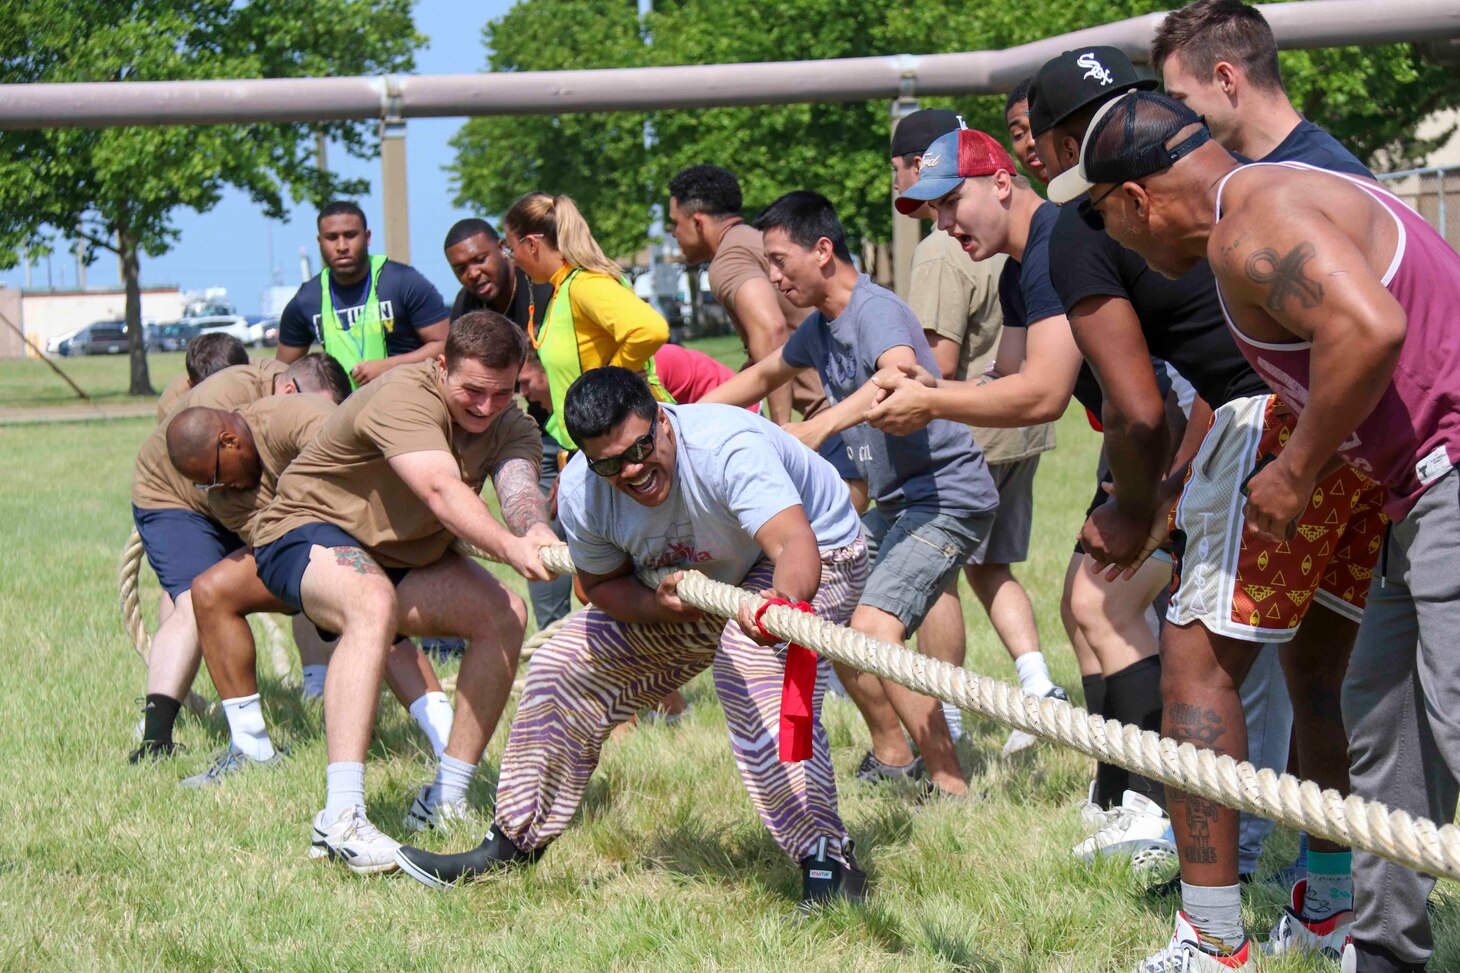 NORFOLK (May 12, 2023) USS Kearsarge (LHD 3) Sailors compete in tug-of-war during Surface Like Week at McCormick Field, May 12. Surface Line Week is an opportunity to build comradery and teamwork not only for individual commands, but fleet-wide.(U.S. Navy photo by Mass Communication Specialist Seaman Chloe Le)